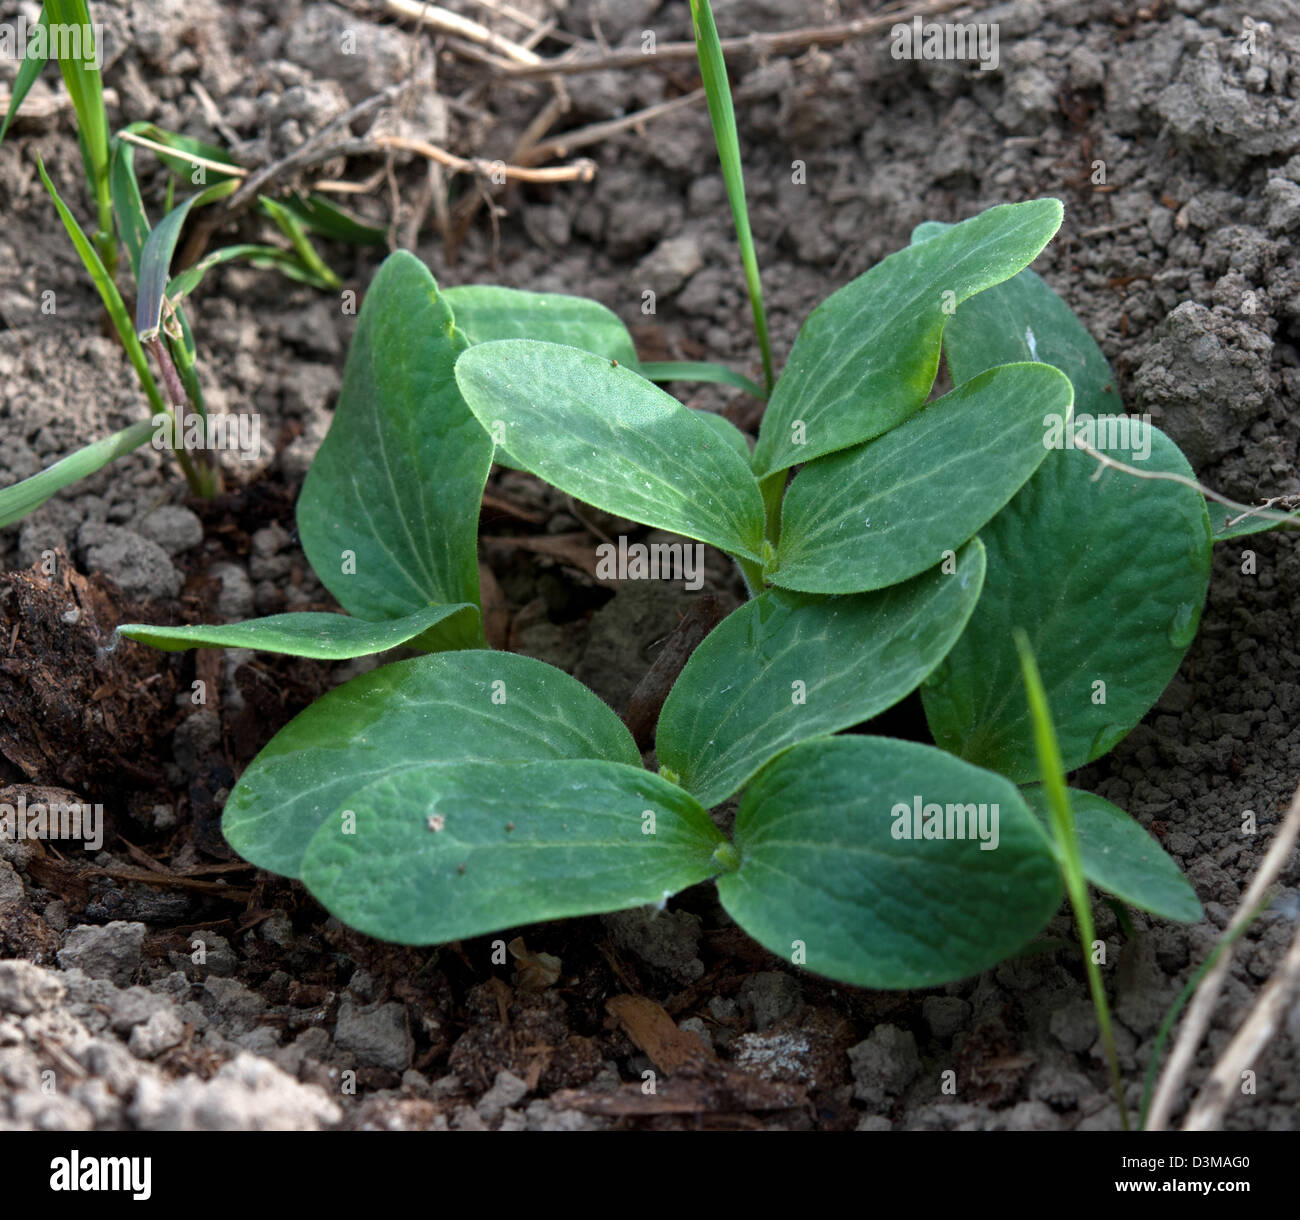 young green plant cucumber growing from soil Stock Photo